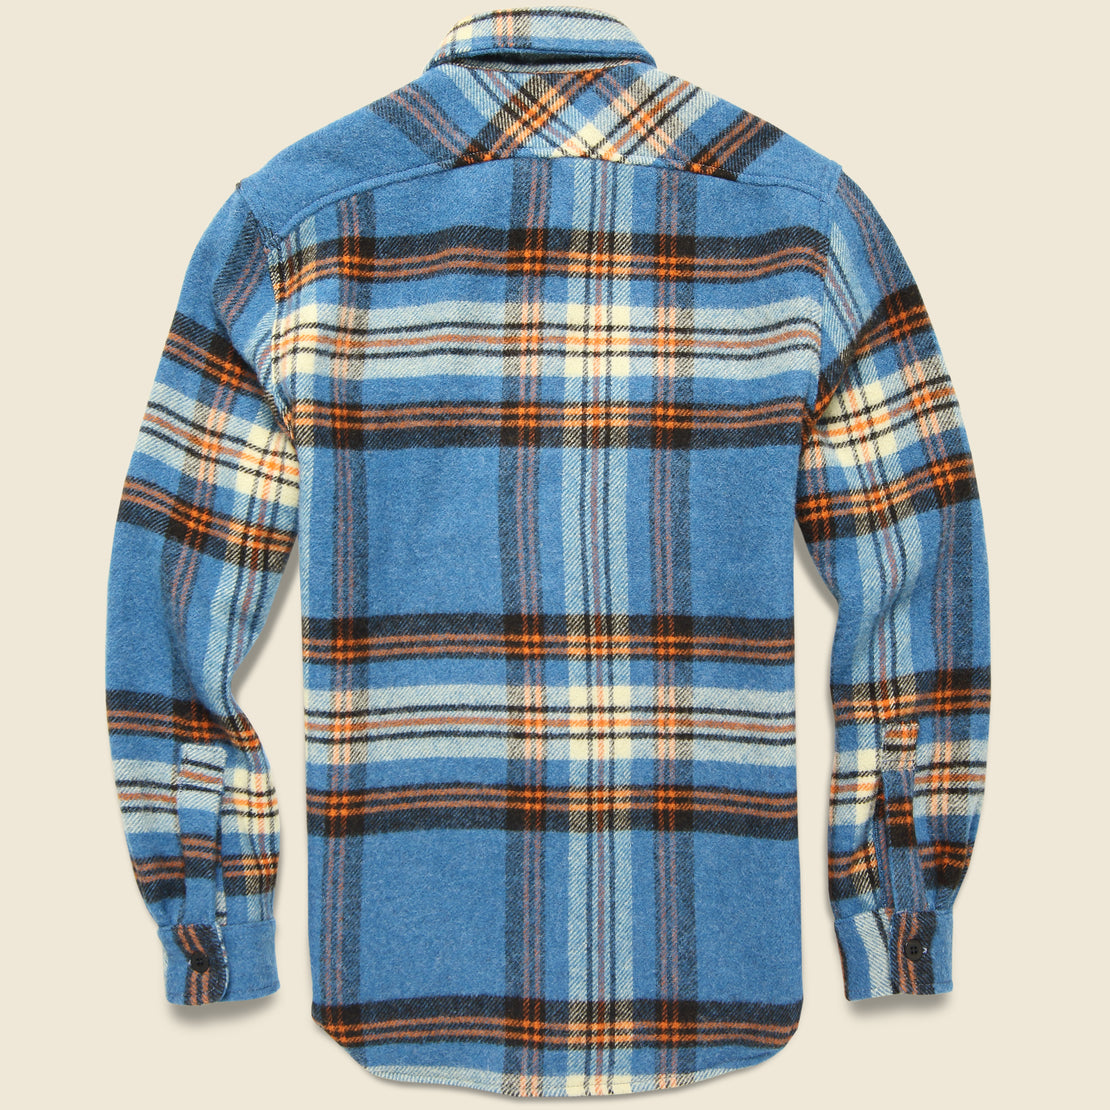 Hall CPO Plaid Wool Overshirt- Teal/Orange - Imogene + Willie - STAG Provisions - Tops - L/S Woven - Overshirt